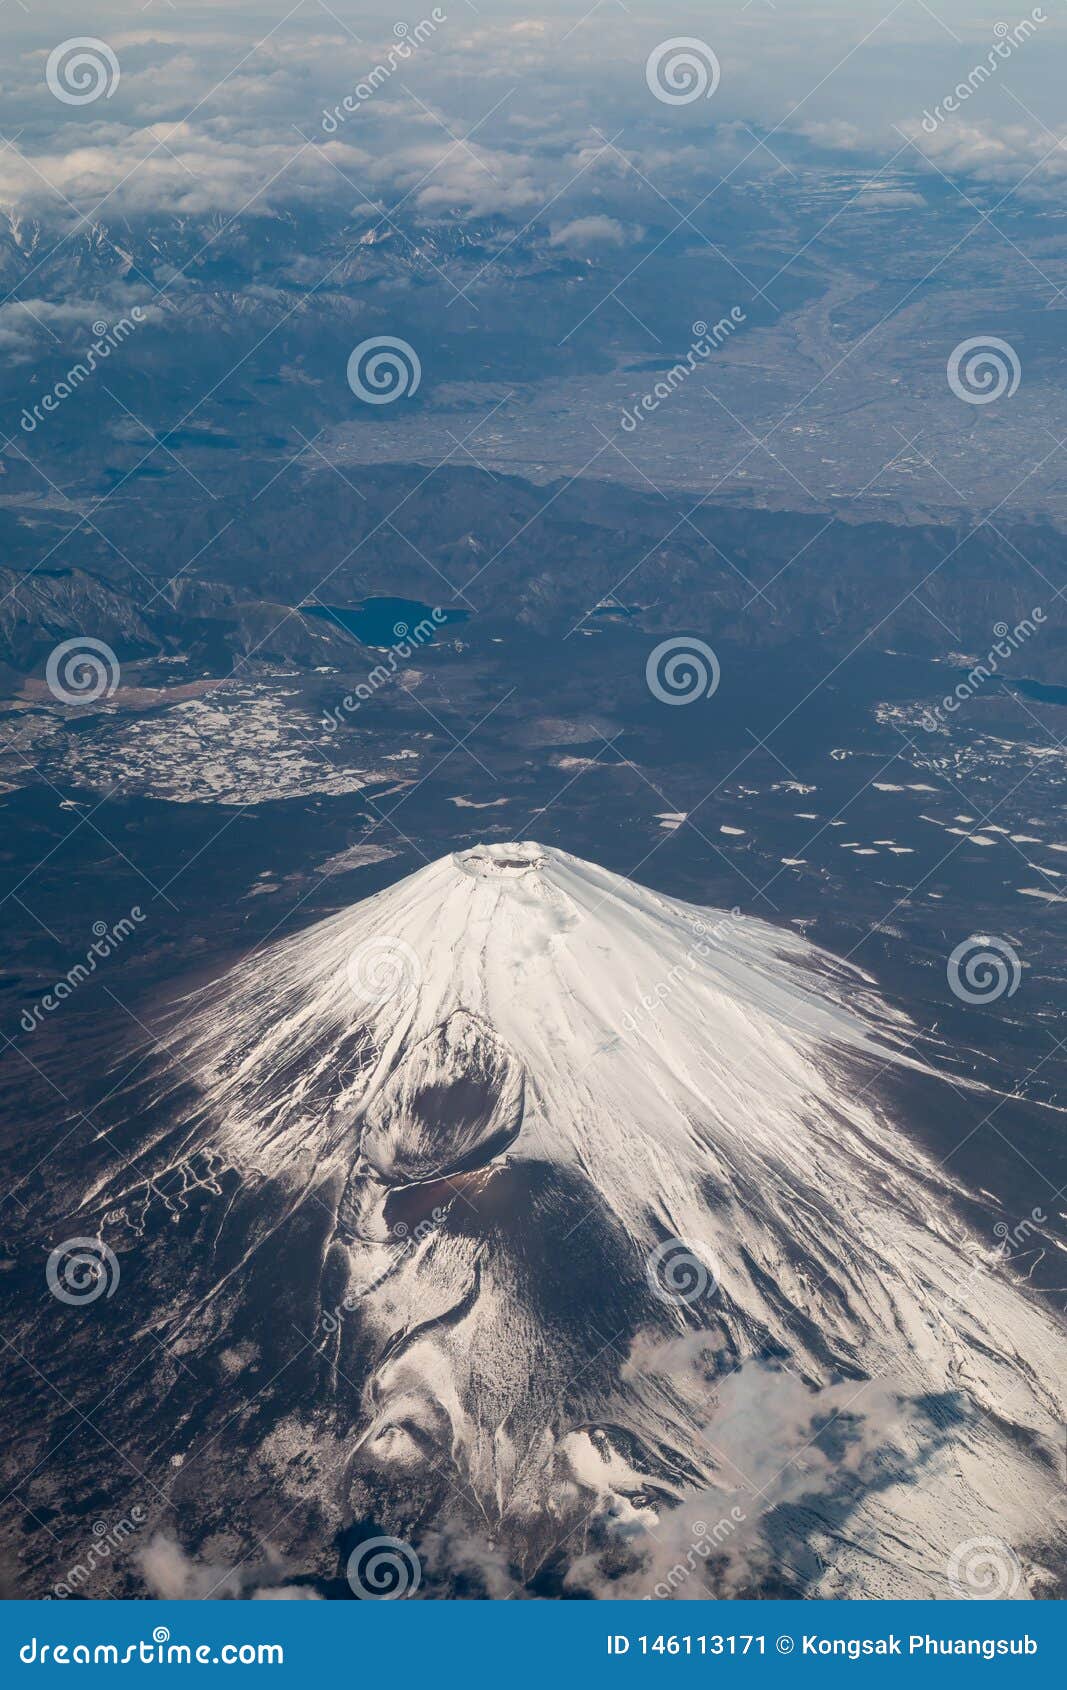 Mount Fuji with Snow on Top during Winter Season Stock Image - Image of ...